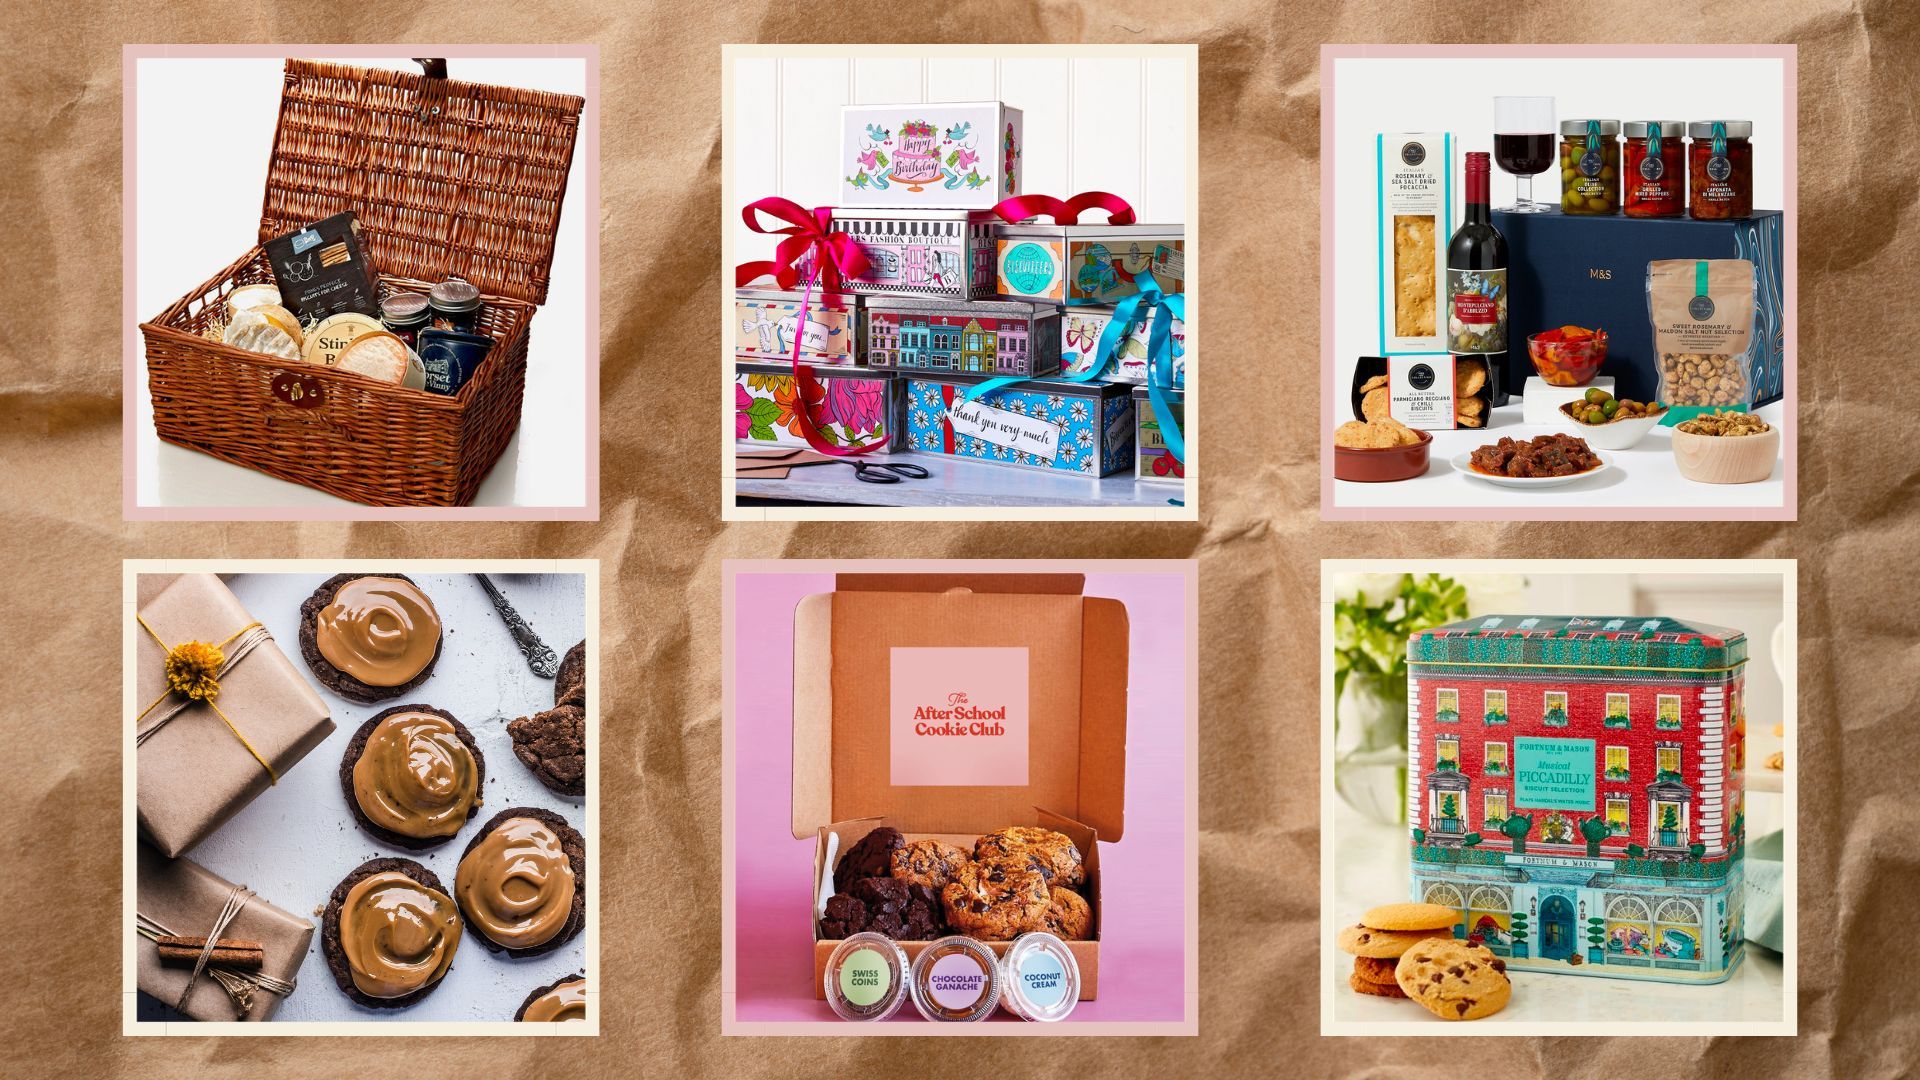 The 10 Best Last Minute Gifts for Foodies | Sidewalk Food Tours